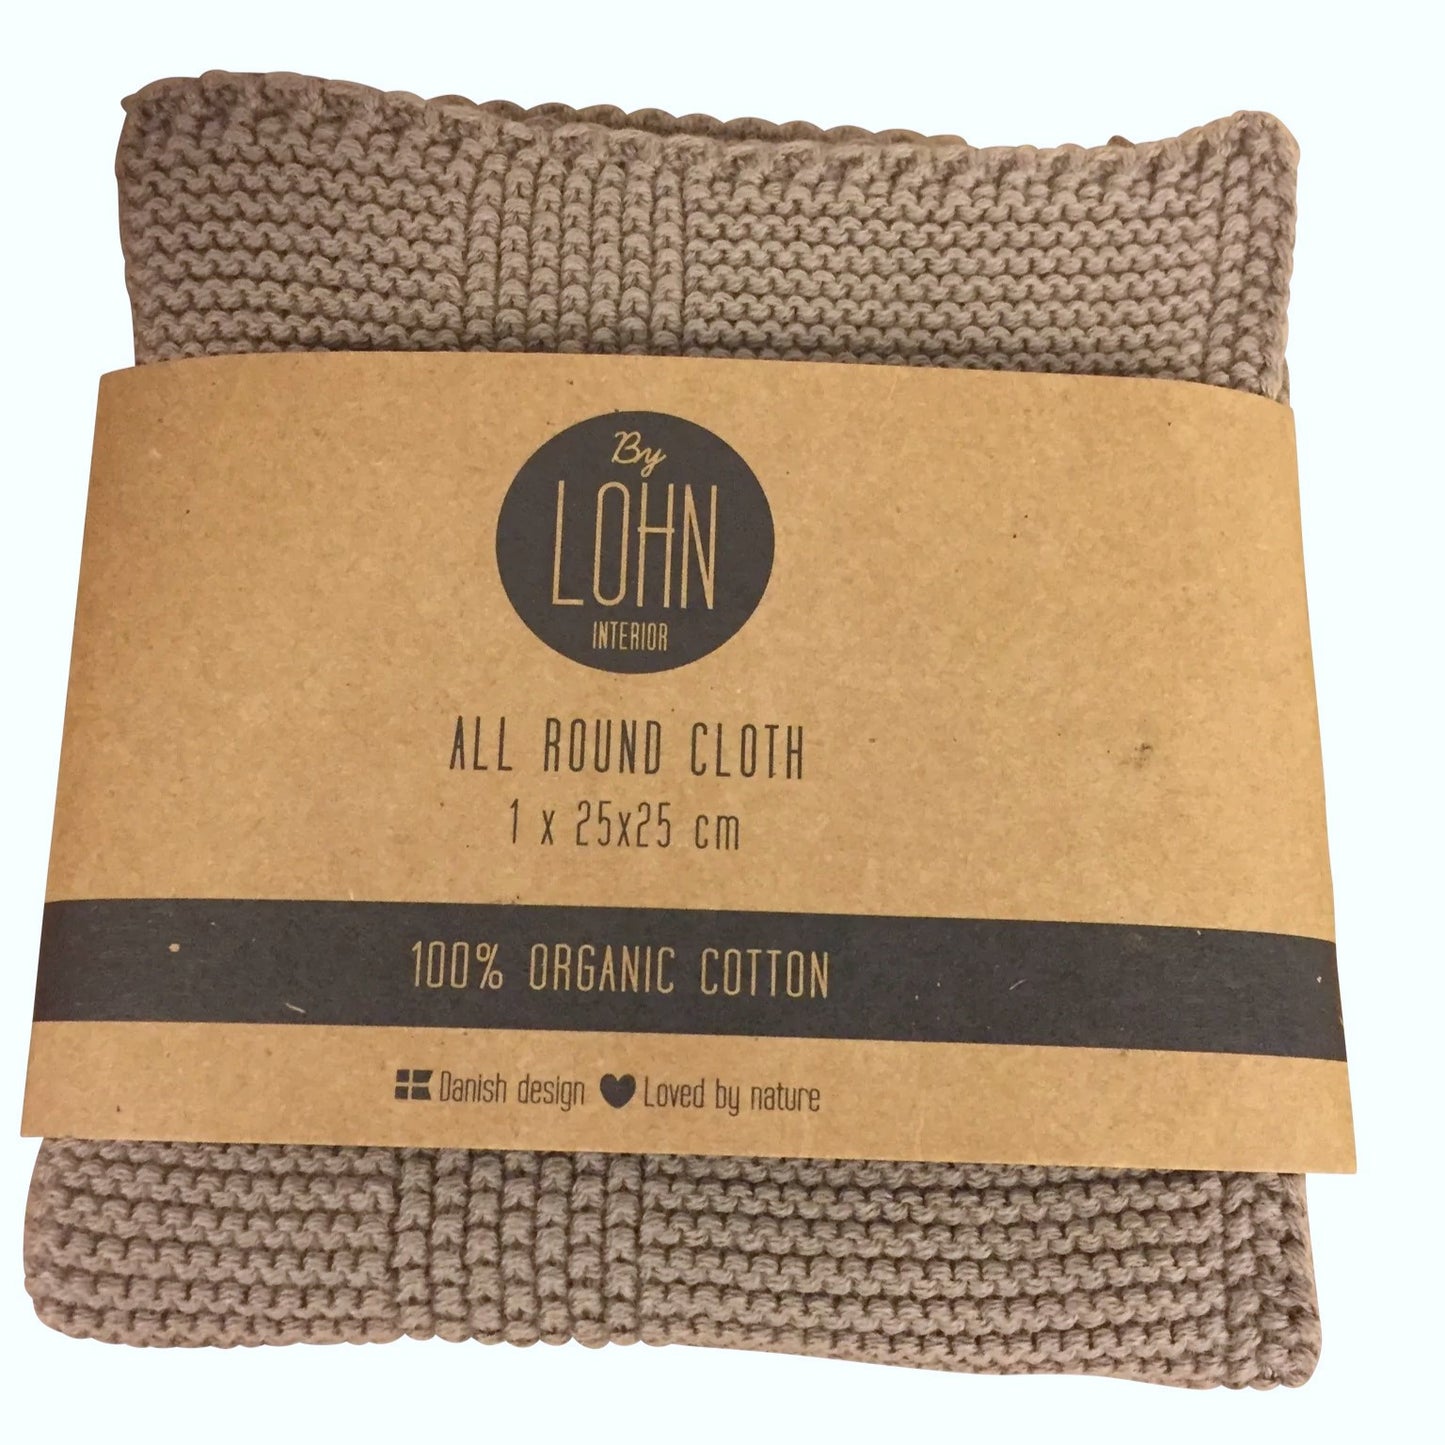 By LOHN - All round cloth 25 x 25 cm, Ginger Snap